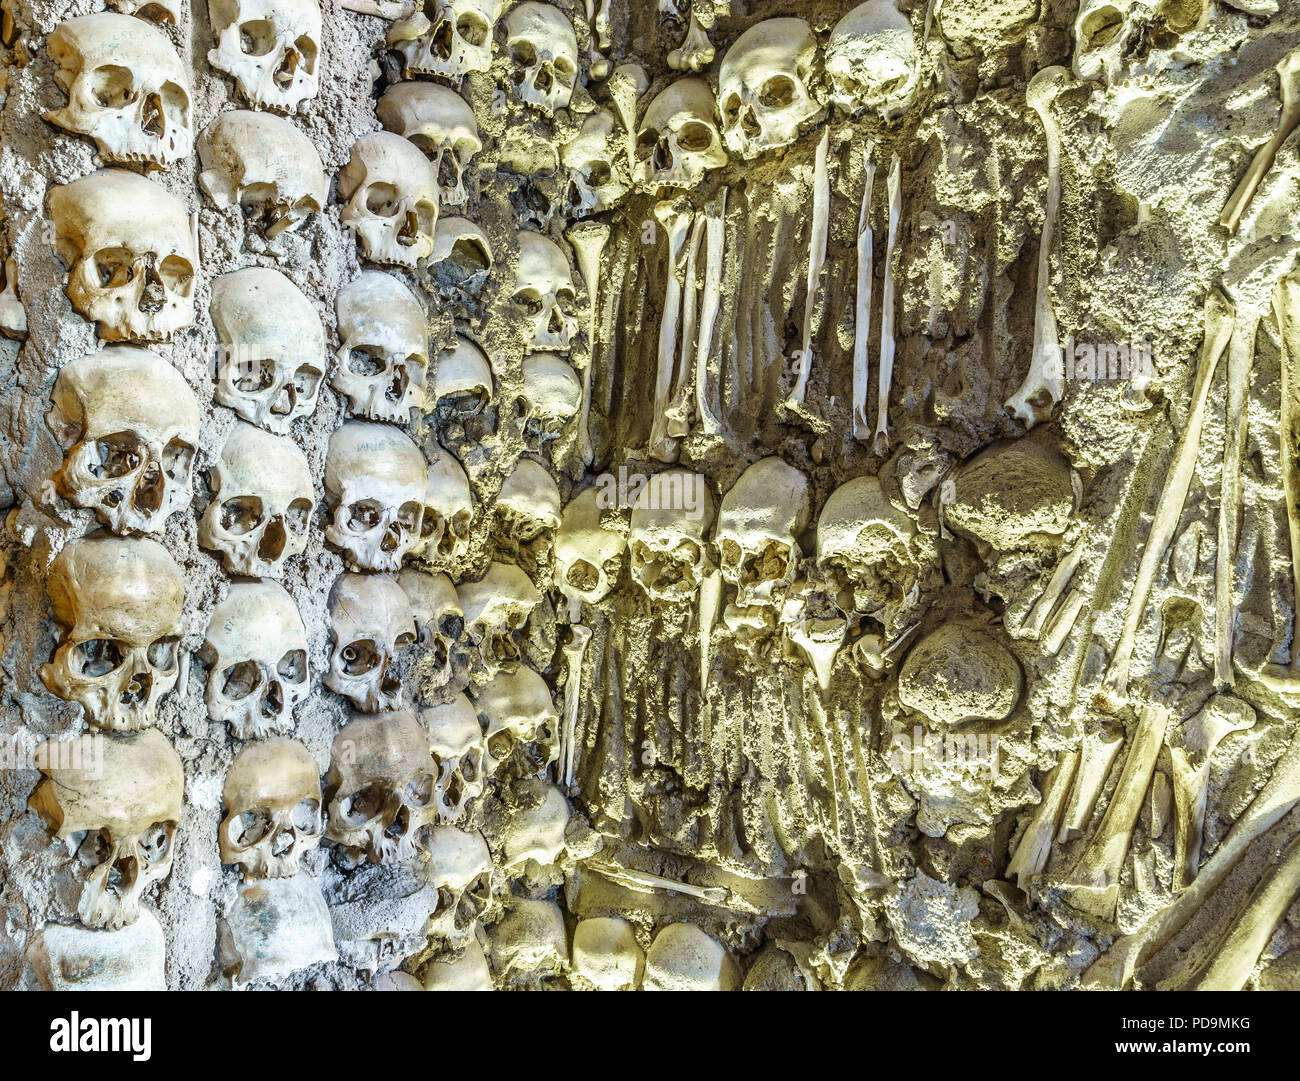 Close-up view of skulls on the wall, Chapel of Bones in Royal Church of St. Francis, Evora, Alentejo, Portugal Stock Photo